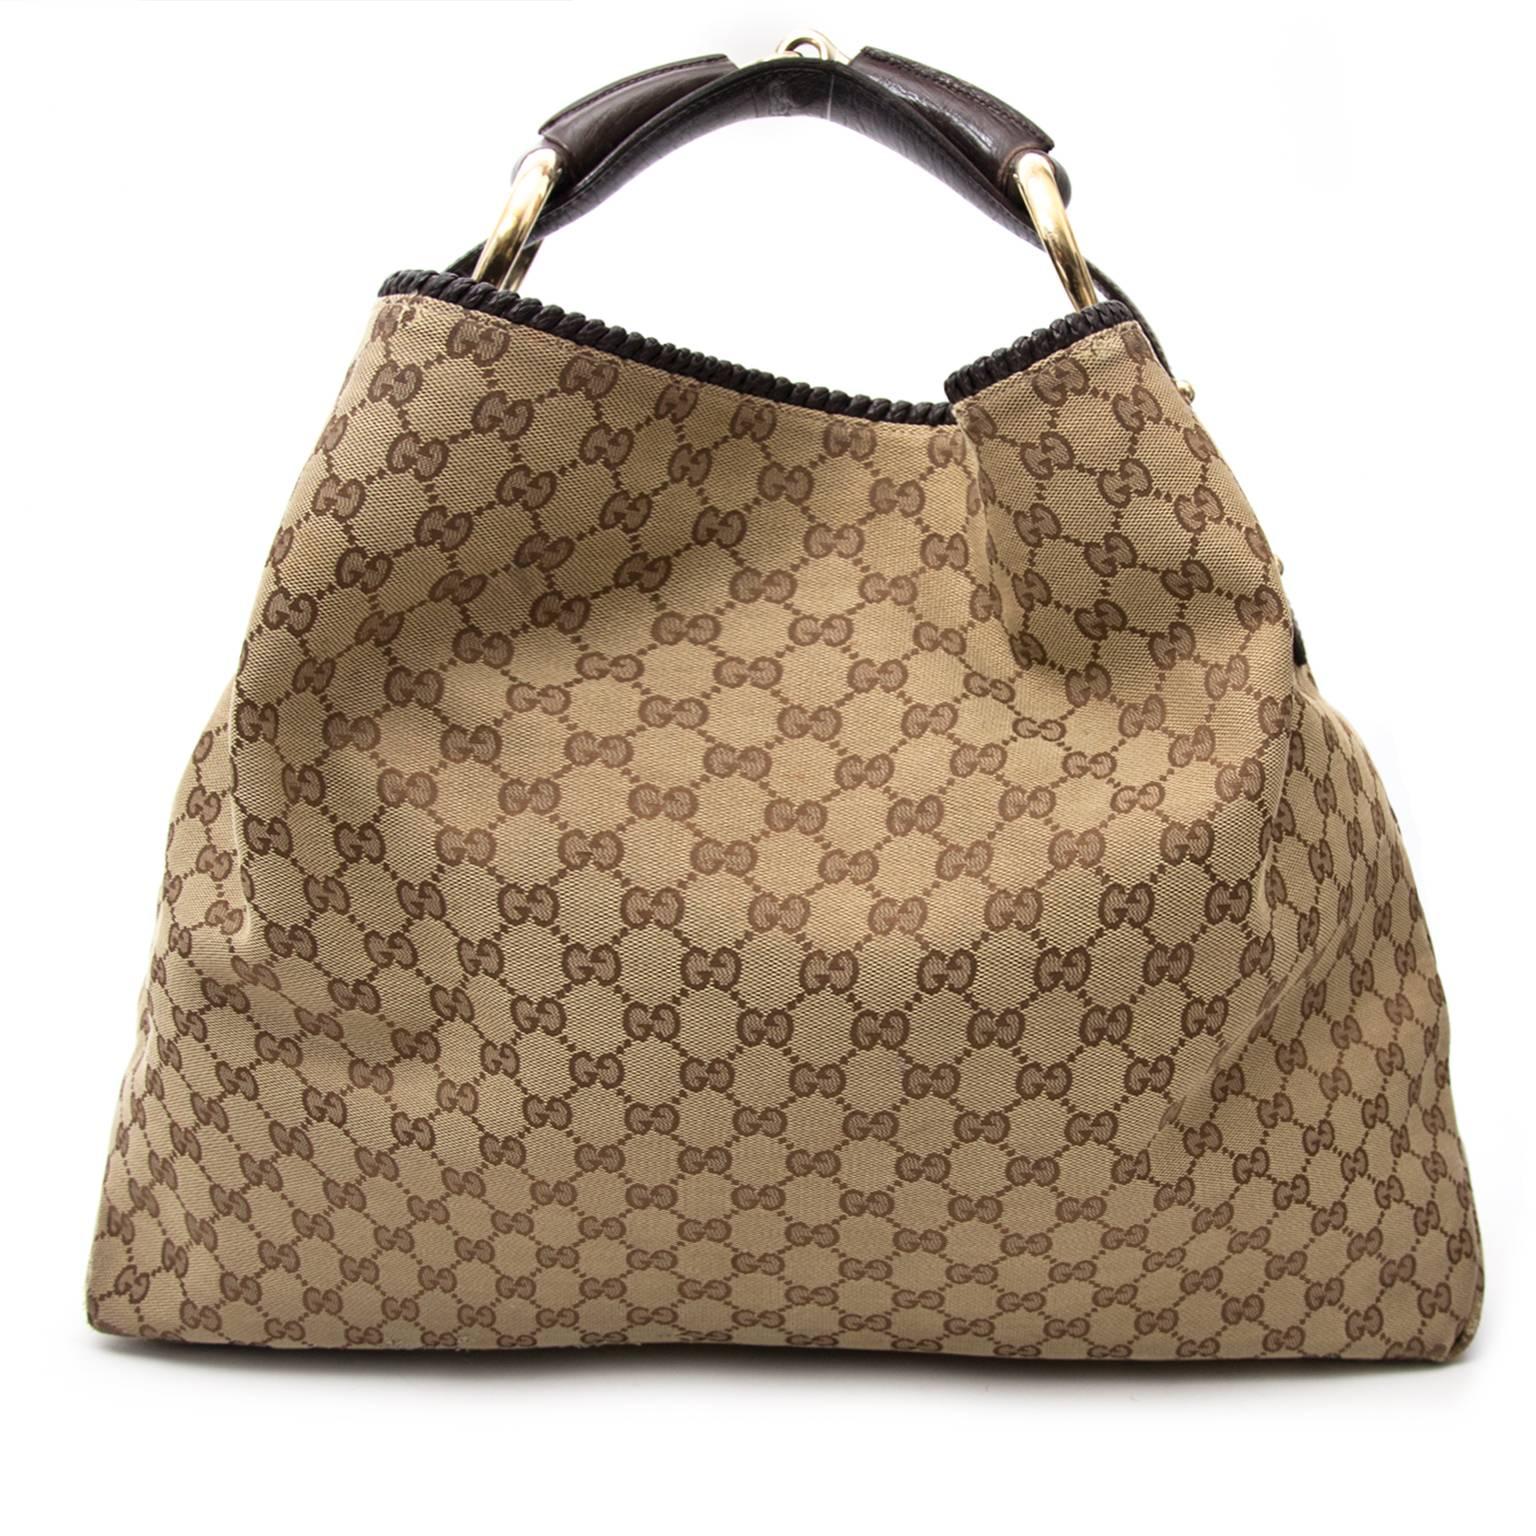 Good preloved condition
Estimated retail price: €2200
Gucci Brown Monogram Horsebit Bag
A must for logo-lovers worldwide! This iconic Gucci horsebit bag comes in a monogram fabric and has dark brown leather details.
This is a spacious model,